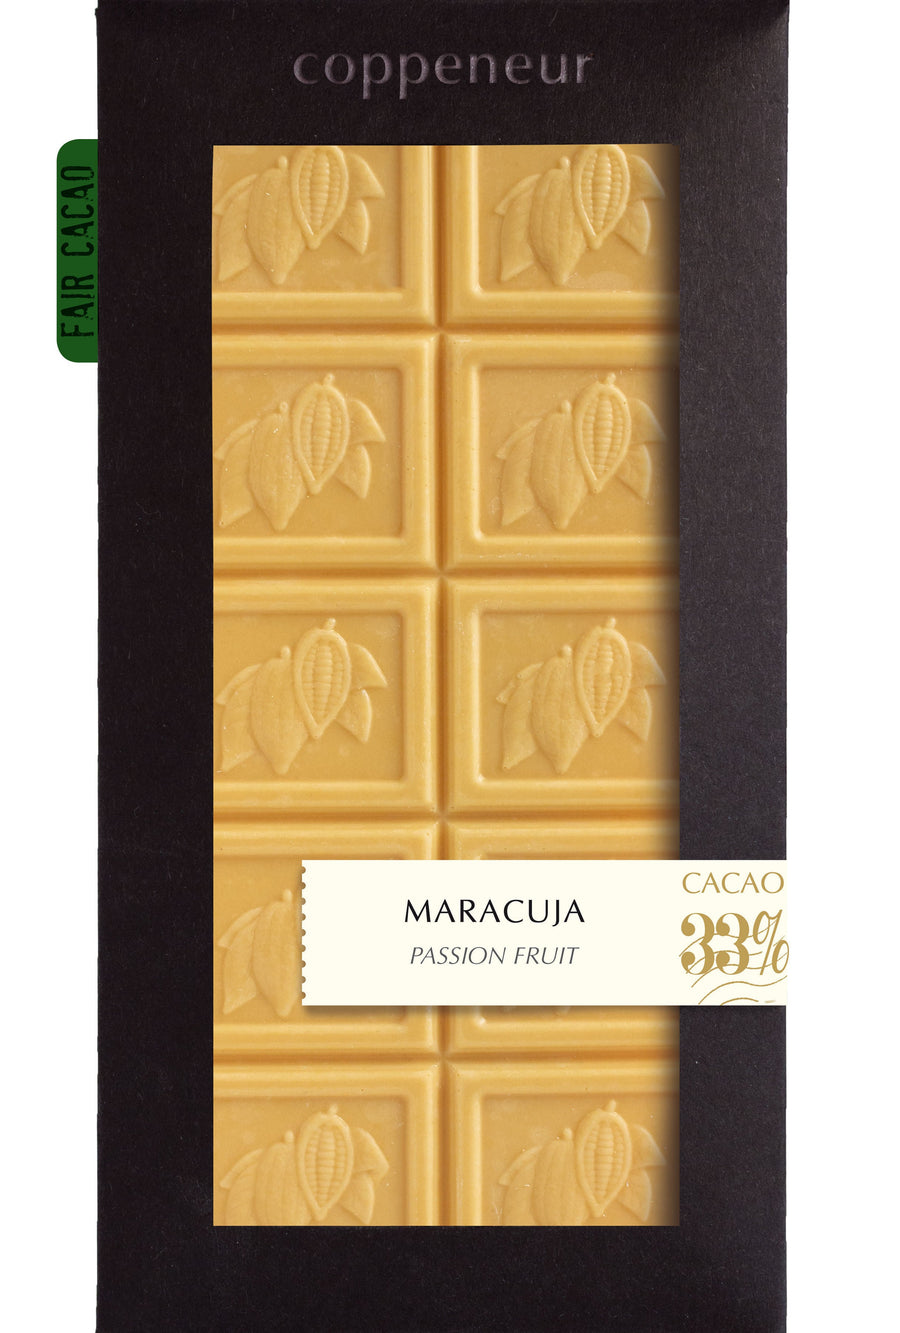 Coppeneur Madagascar 33% White Chocolate with passionfruit - Chocolate Collective Canada